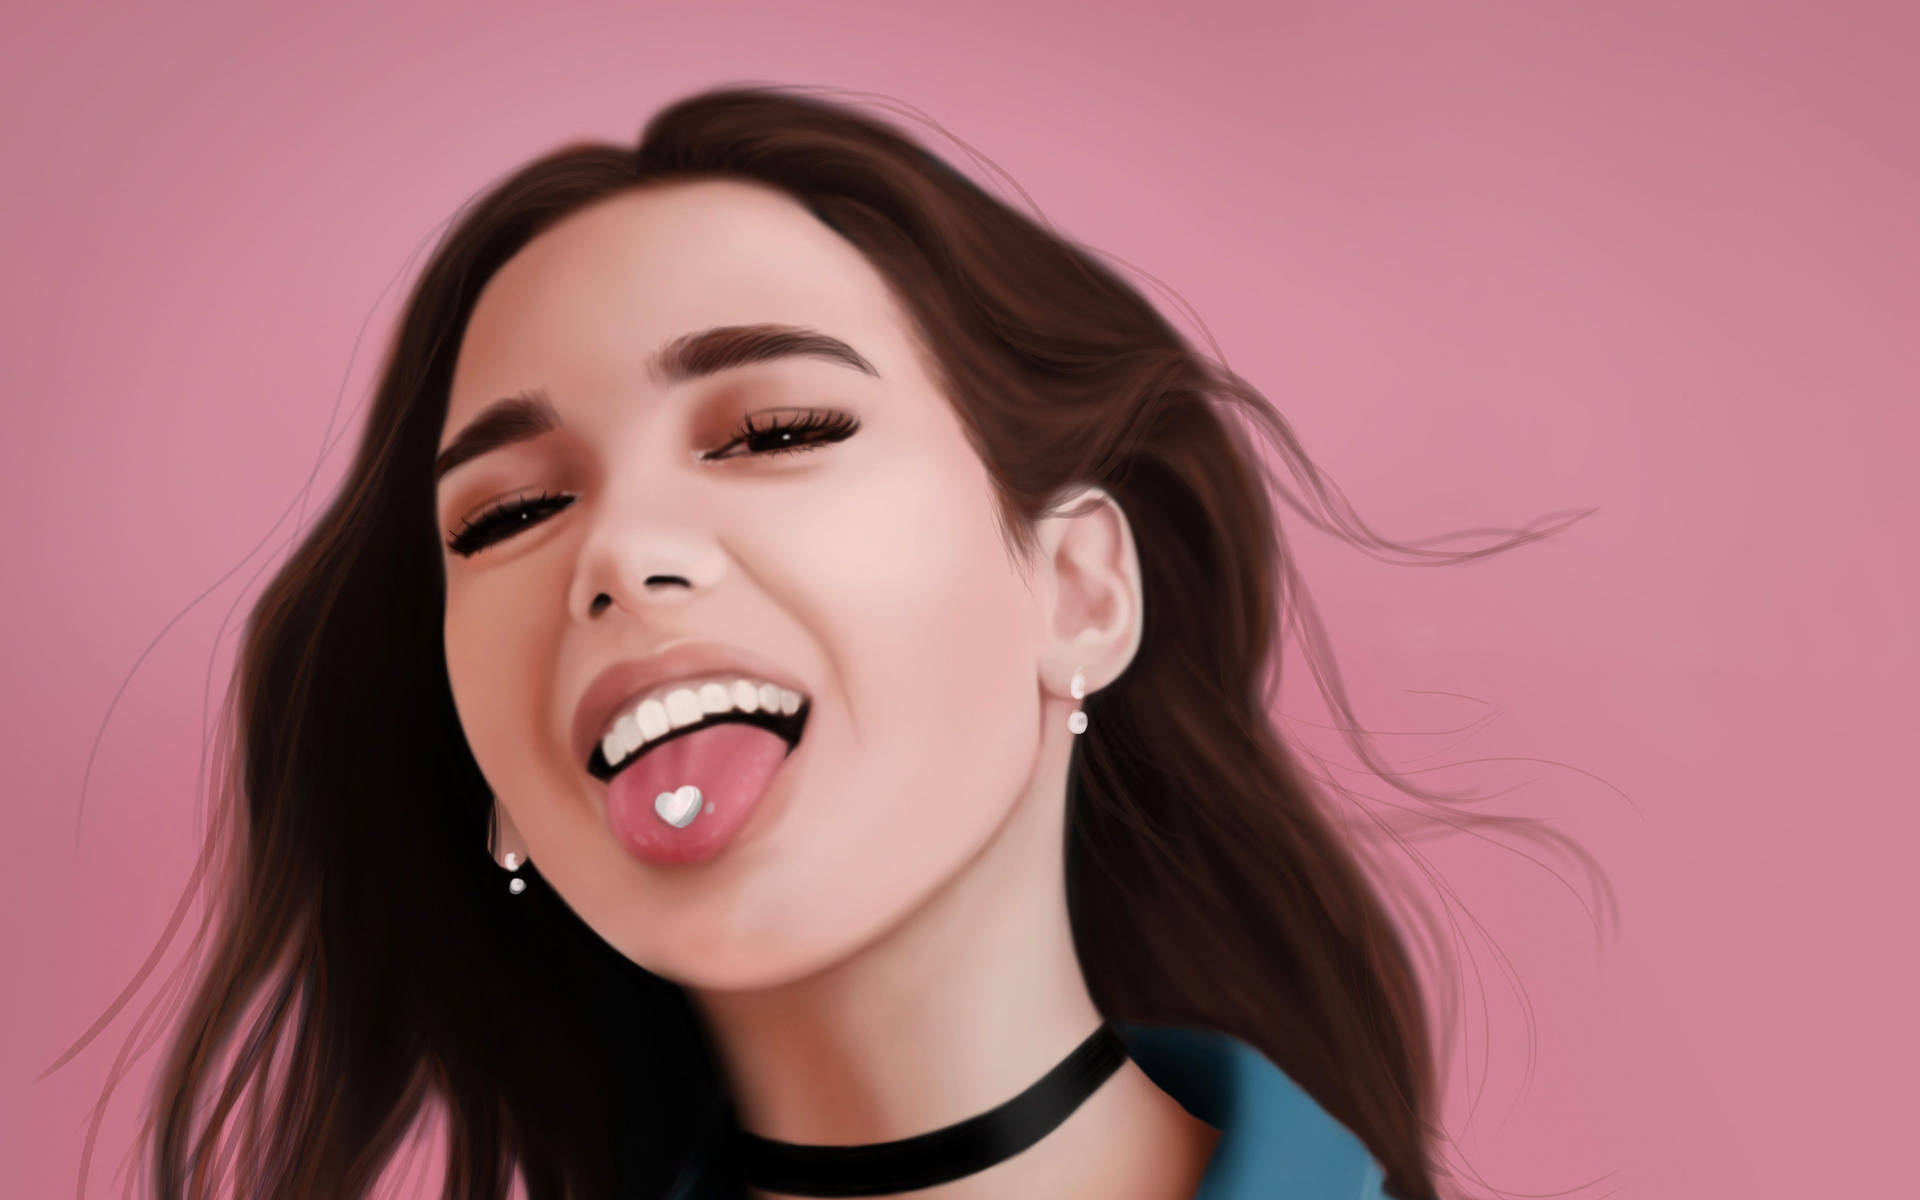 Cartoonish Dua Lipa With Her Tongue Out Background